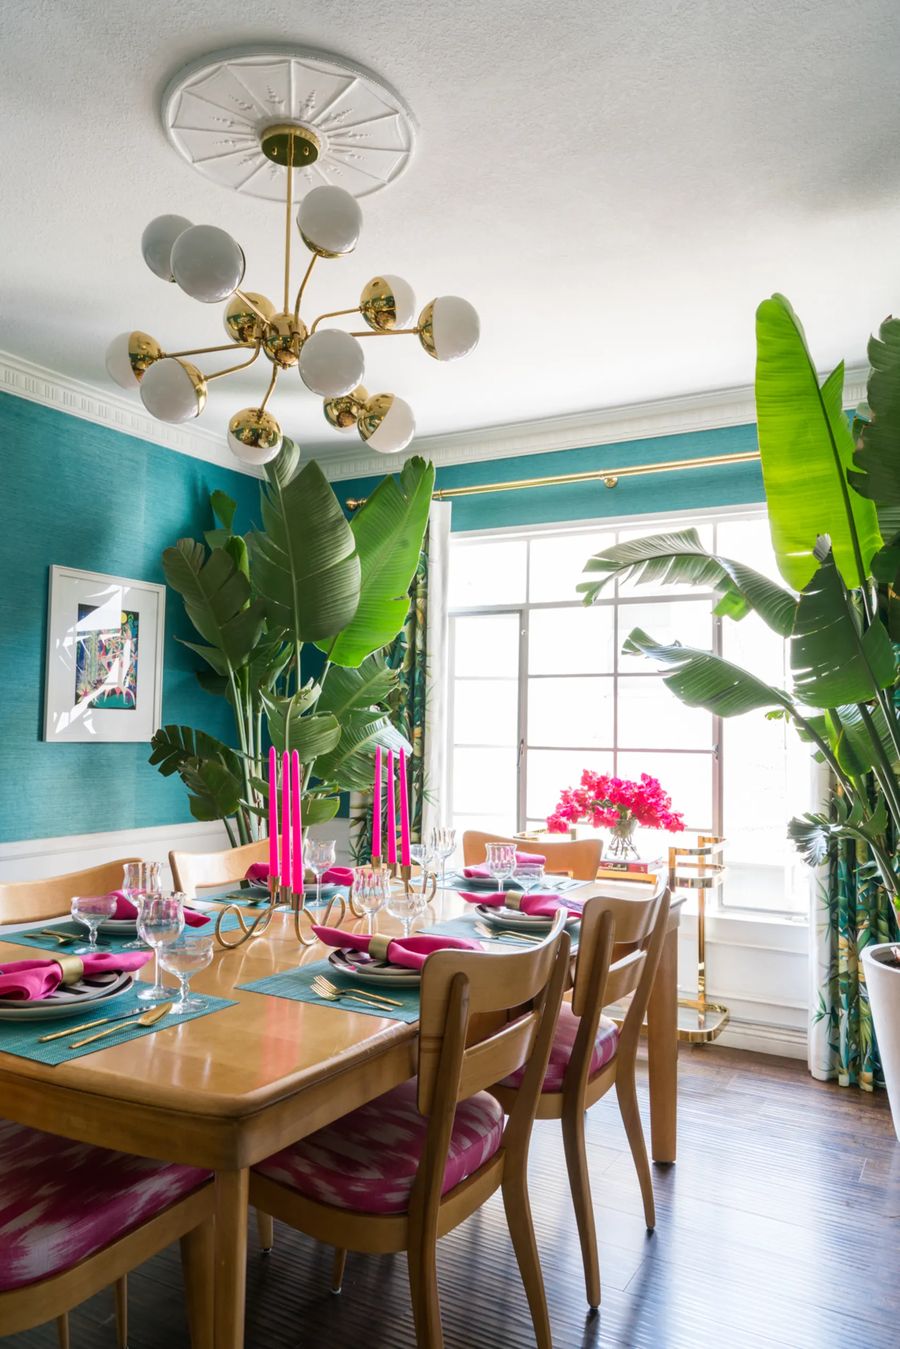 10 Best Tropical Dining Room Decor Ideas, Tropical Dining Room Table And Chairs